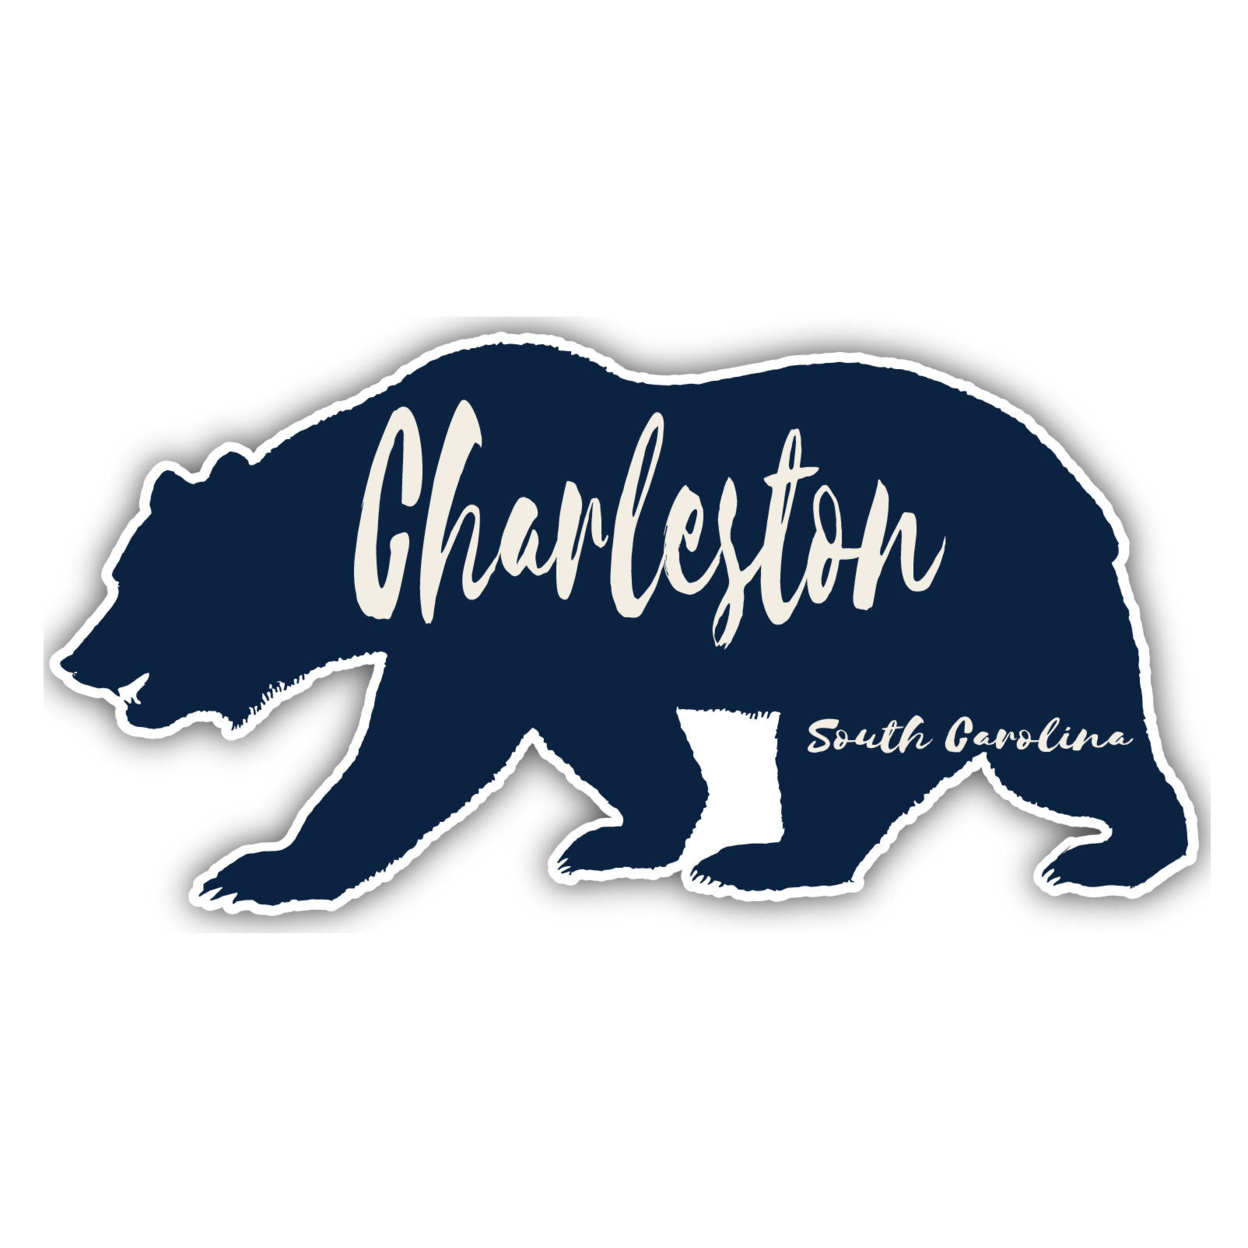 Charleston South Carolina Souvenir Decorative Stickers (Choose Theme And Size) - 4-Pack, 10-Inch, Tent